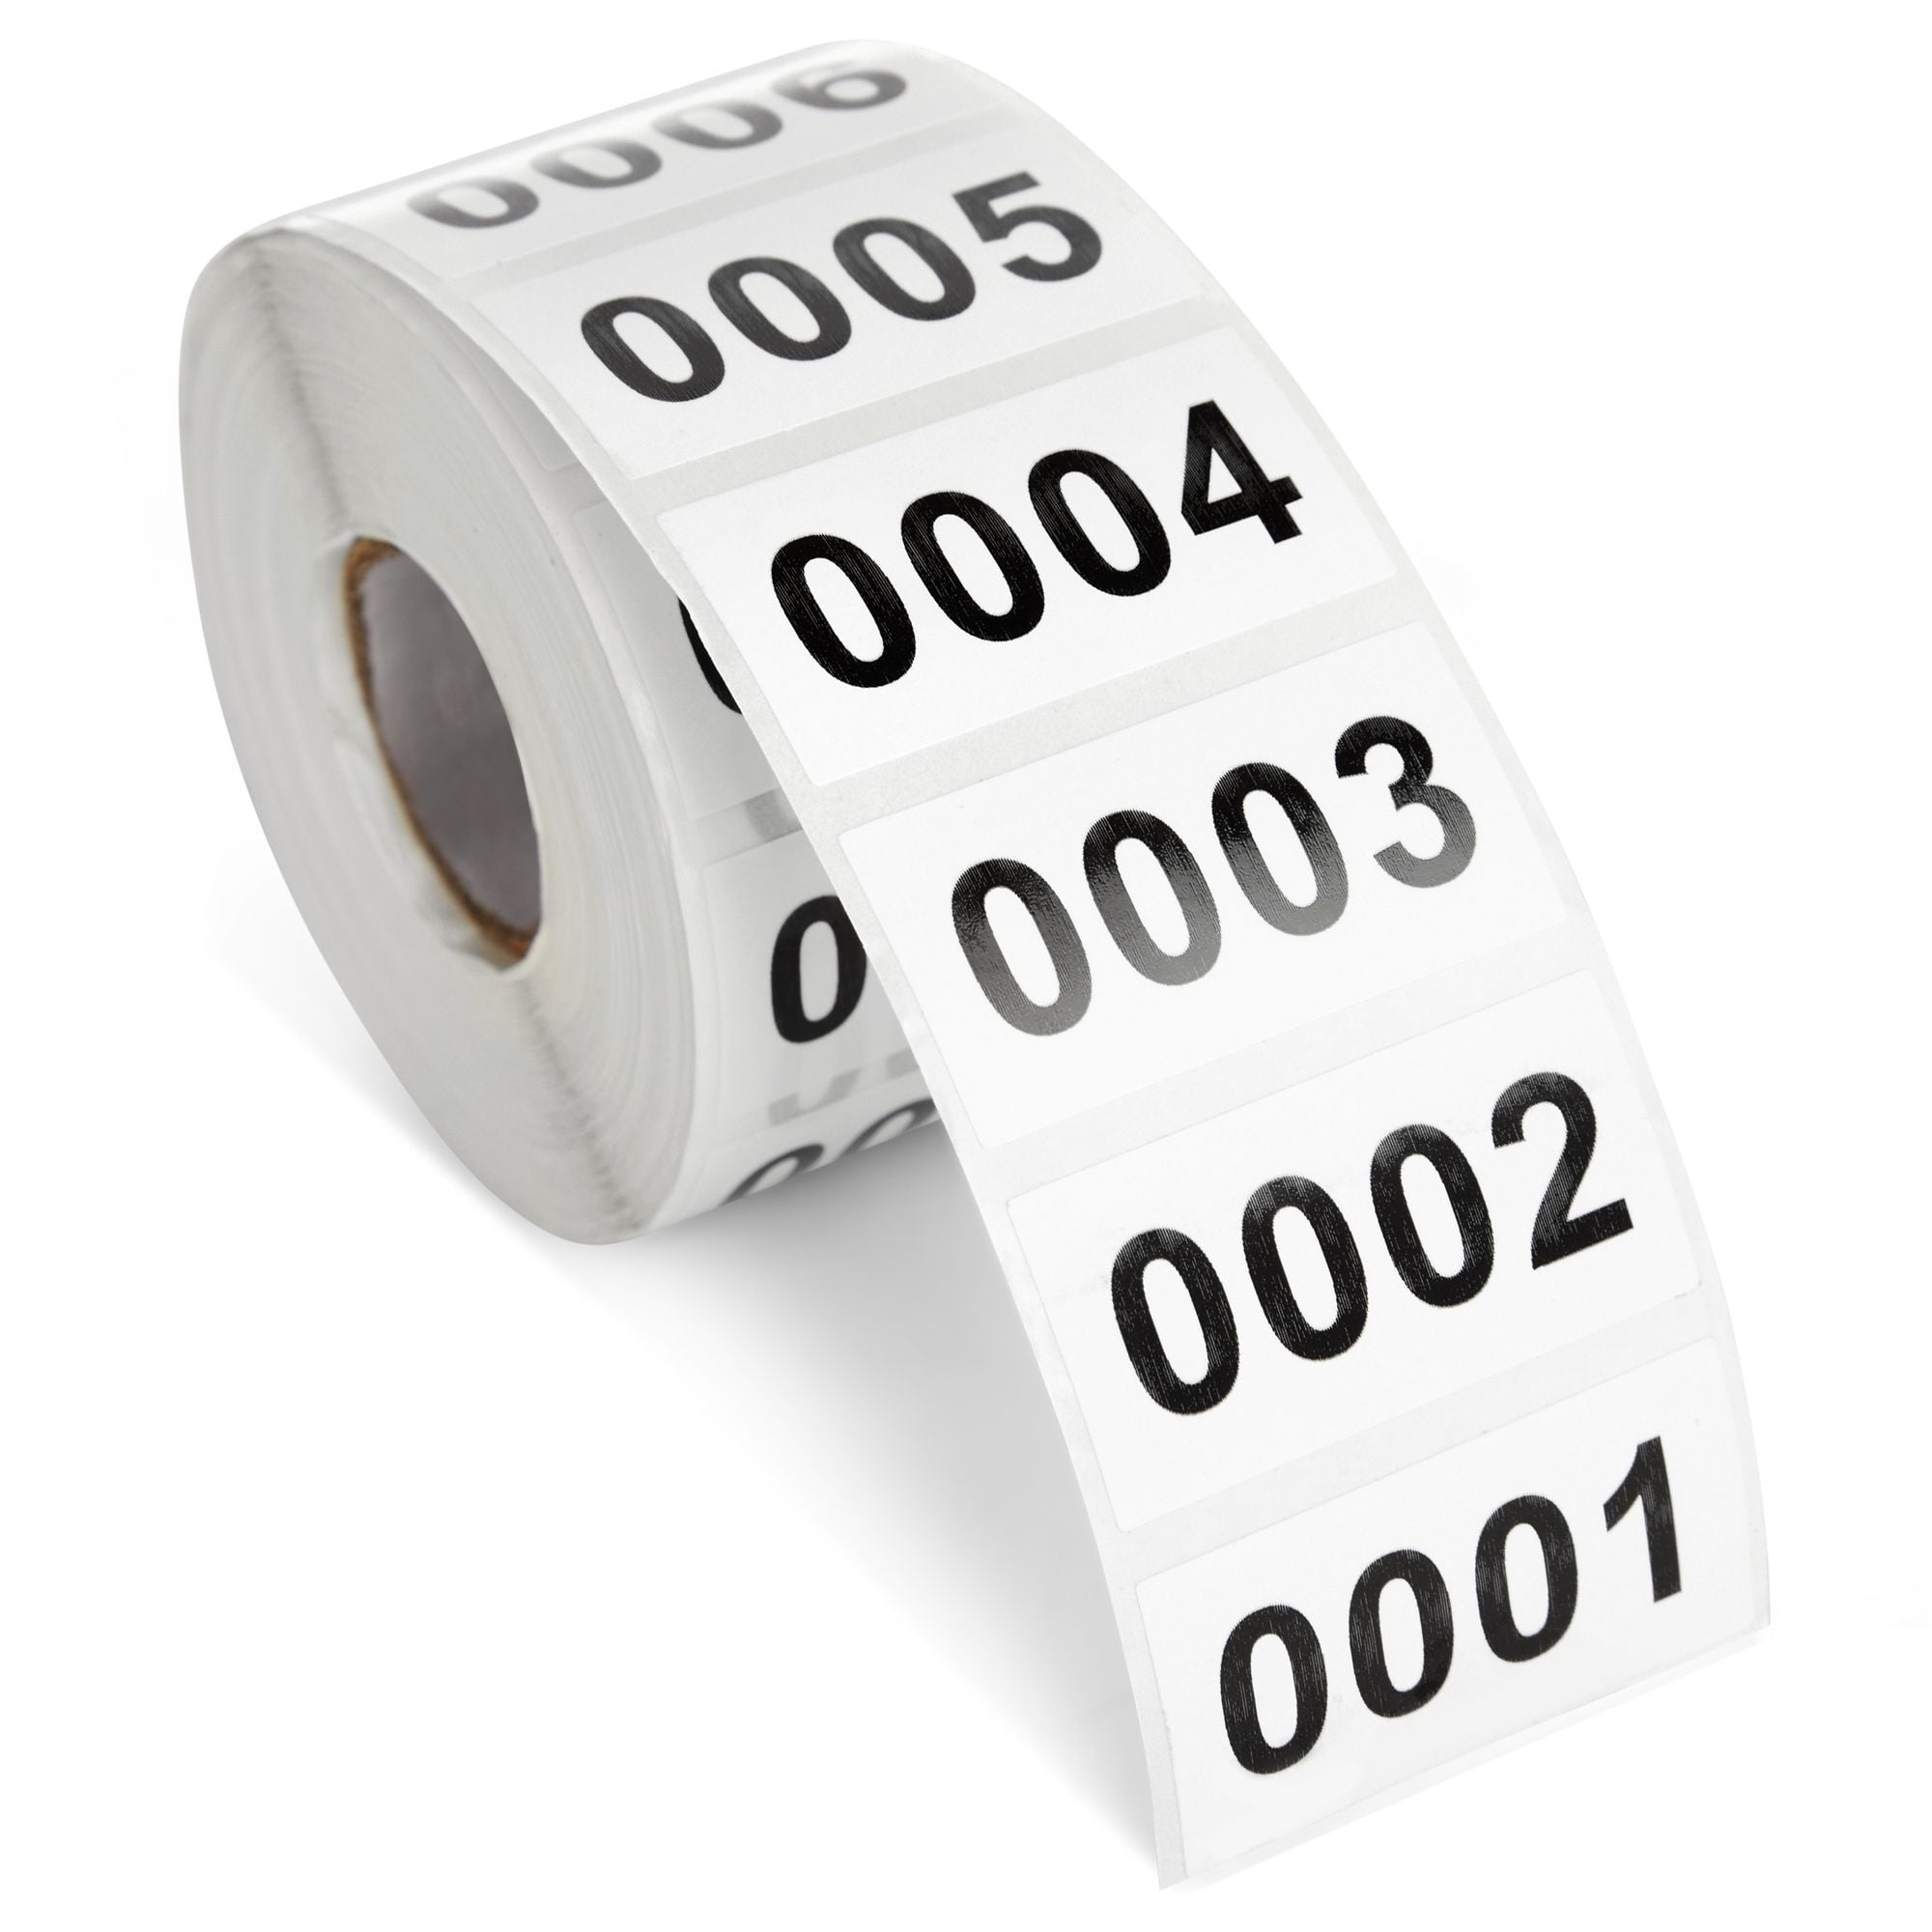 Hybsk Number Stickers 1-10 1 Inch Round Office Warehouse Organization  Inventory Storage Labels - 500 per roll 5000 Total Stickers (Gloss Paper)